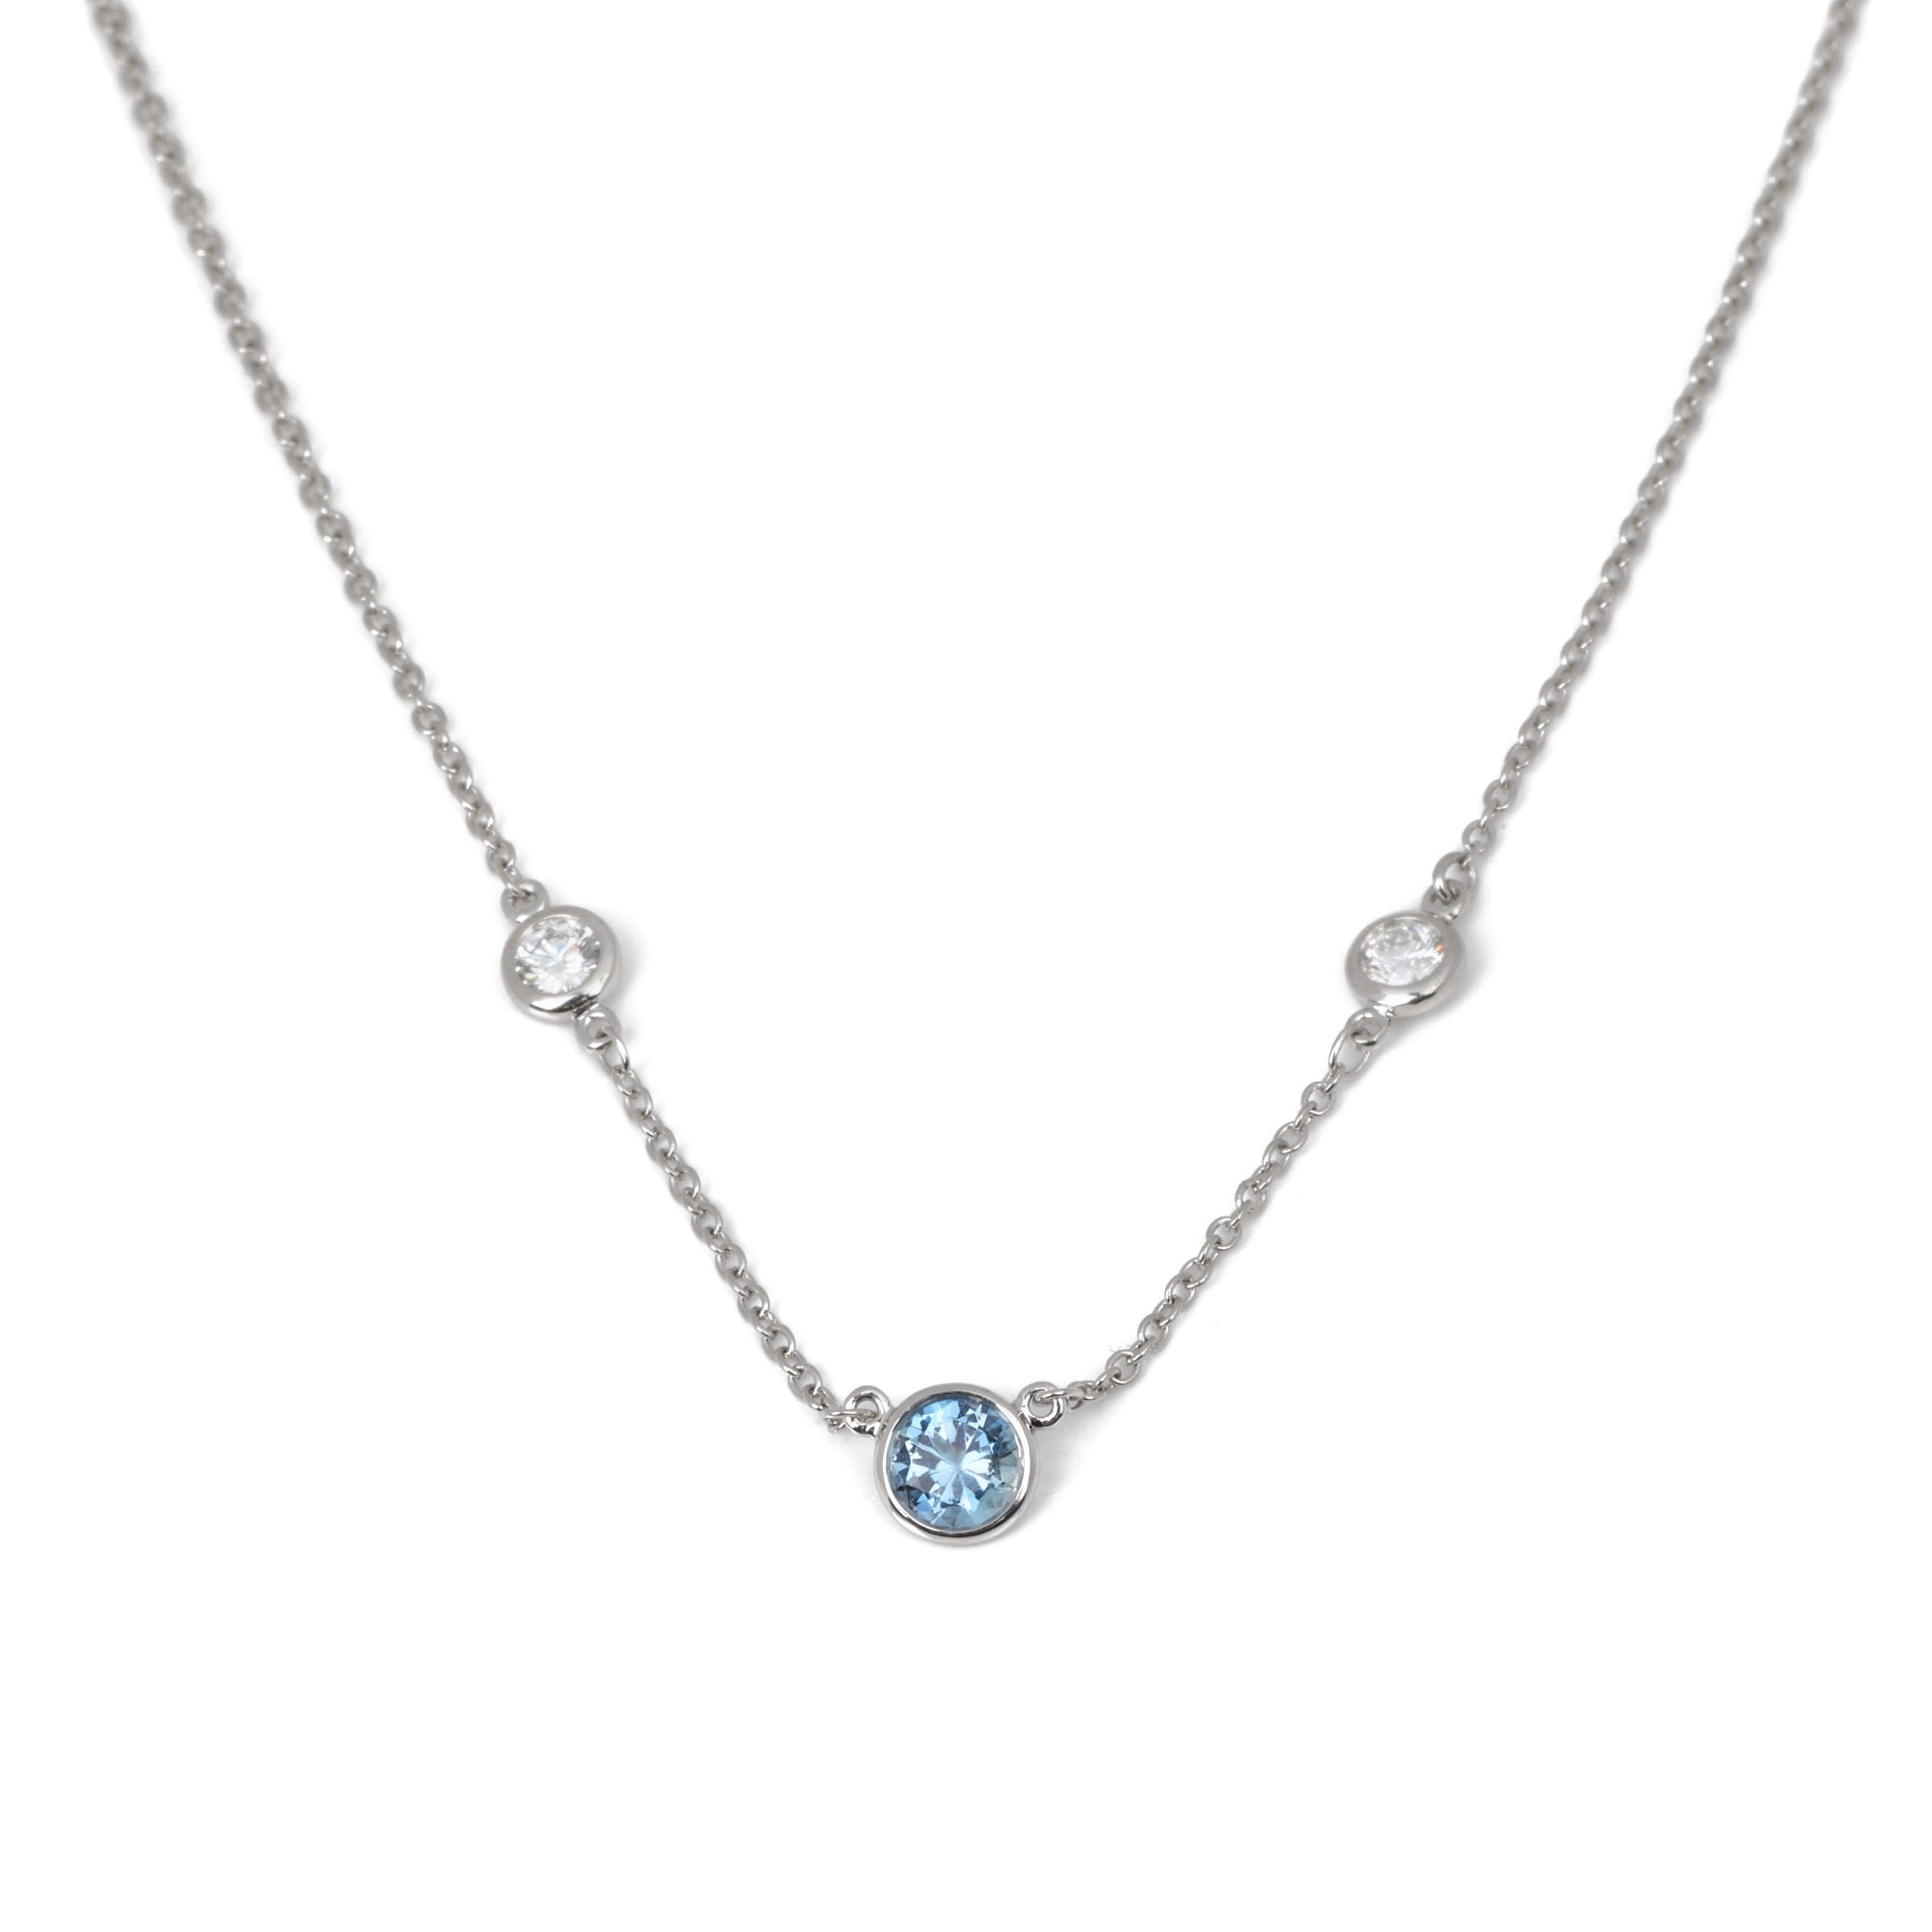 Tiffany & Co. Colours by the Yard Aquamarine and Diamond Necklace